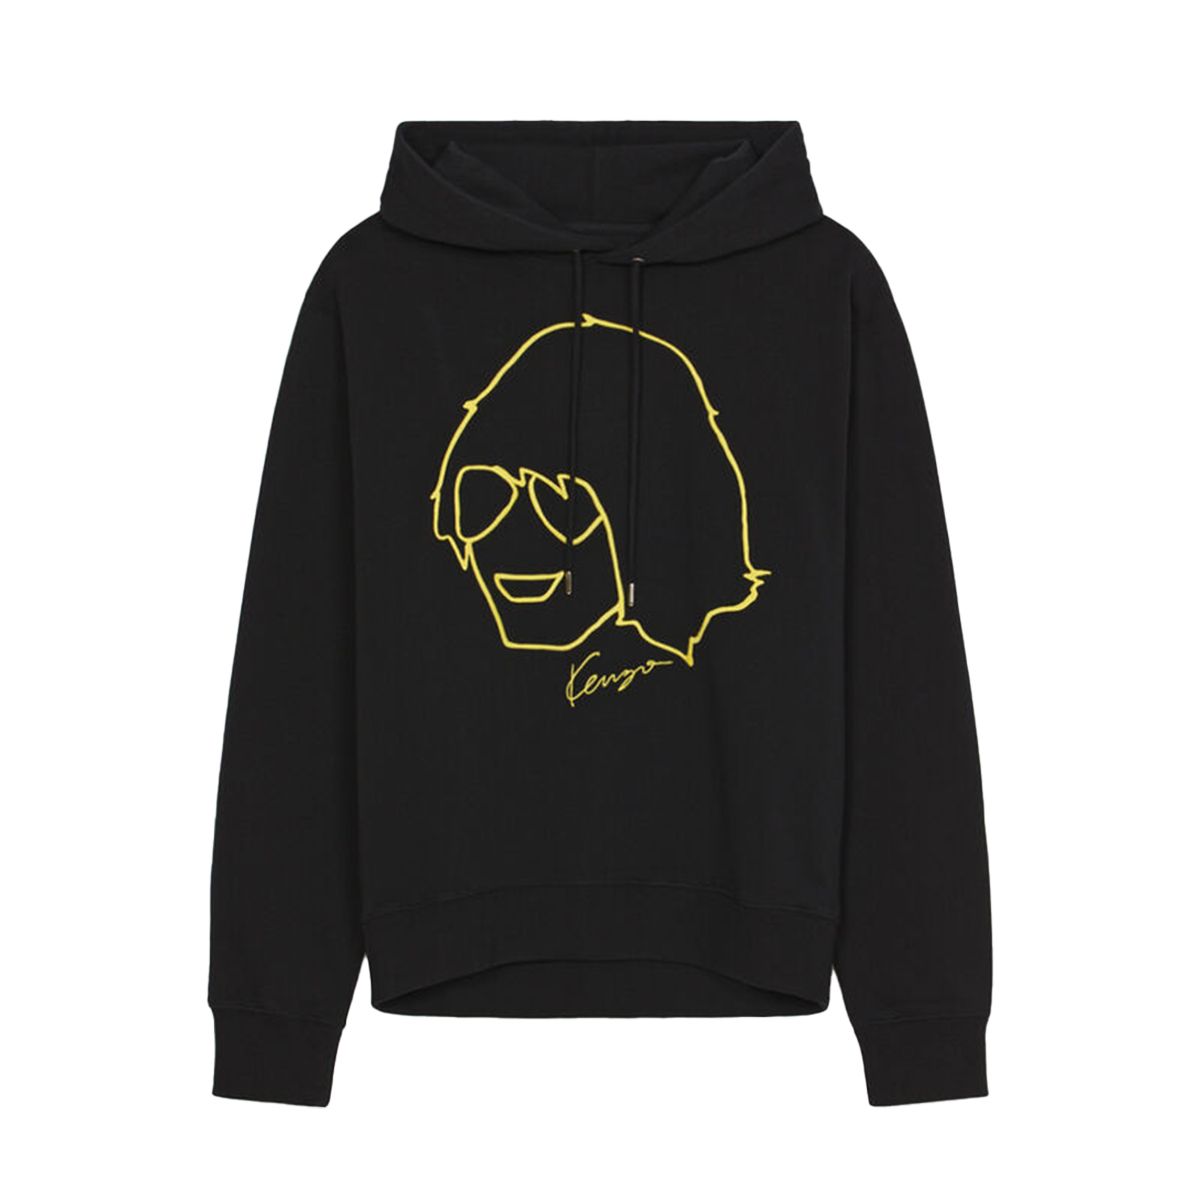 Embroidered Design Hoodie